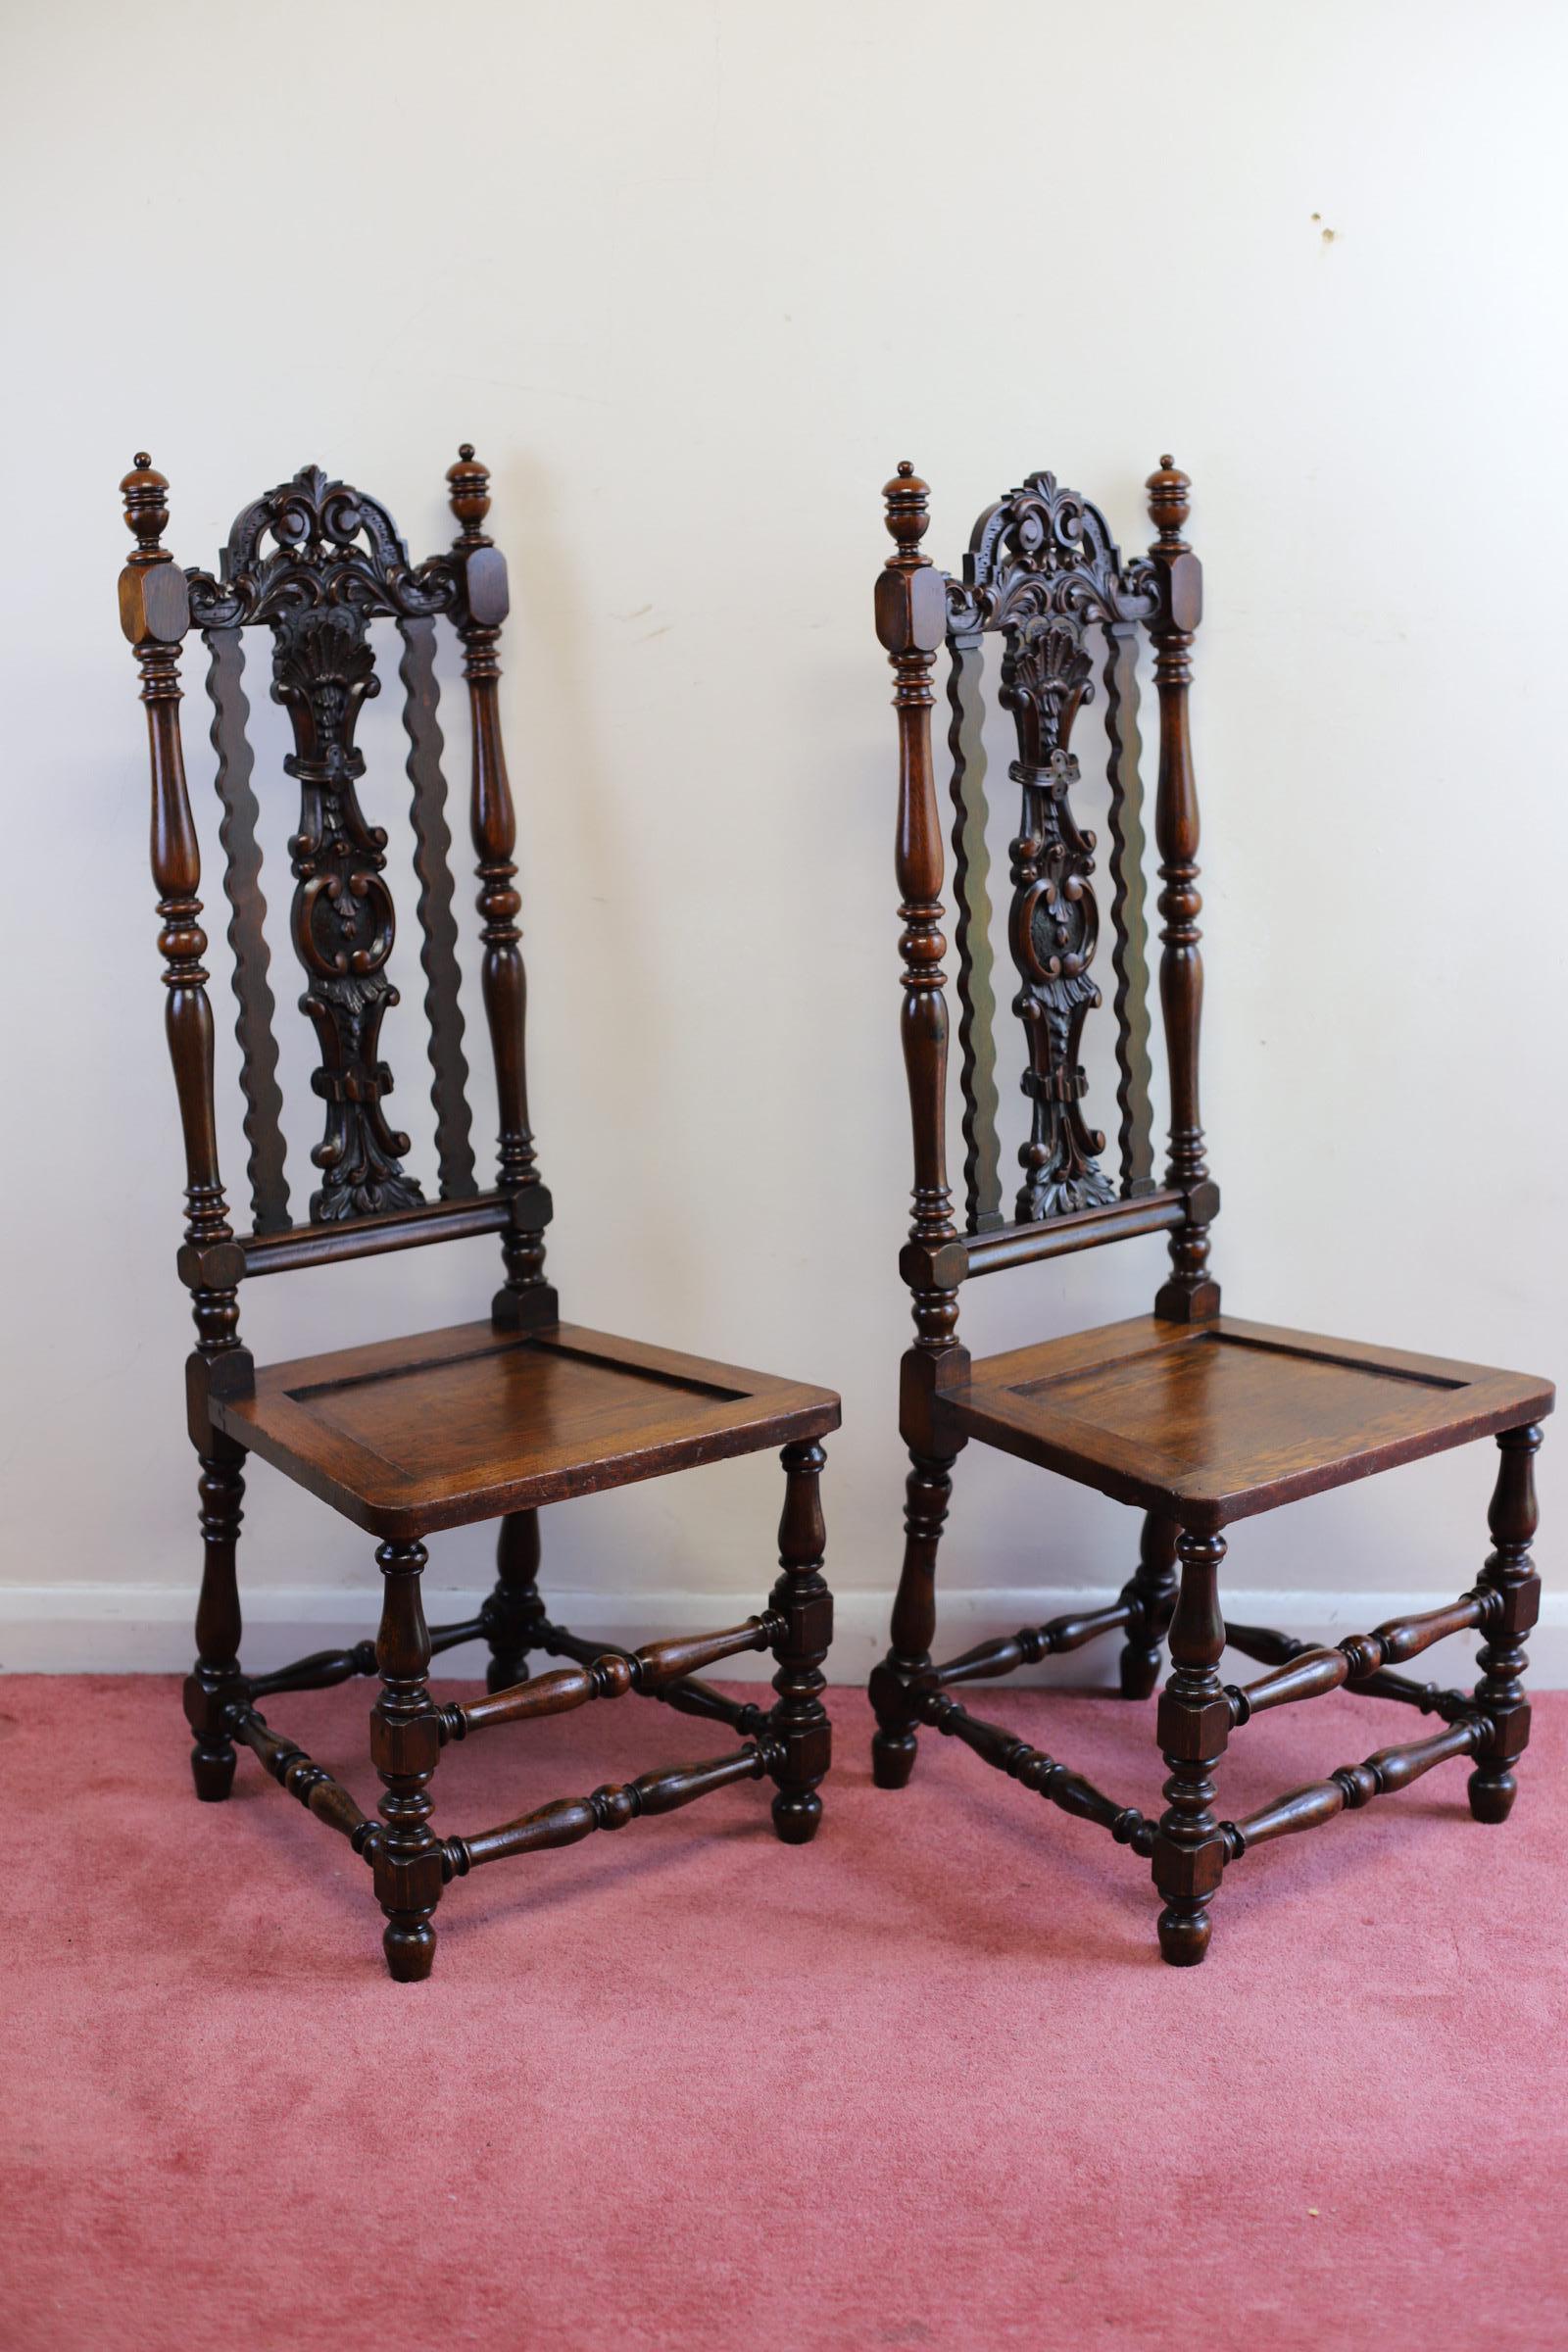 Add a touch of class to your home with this stunning pair of antique Carolean hall chairs. Made from oak, they exude a warm brown colour that is perfect for any decor. The chairs are sold as a set of two and have a seat height of 42cm, making them